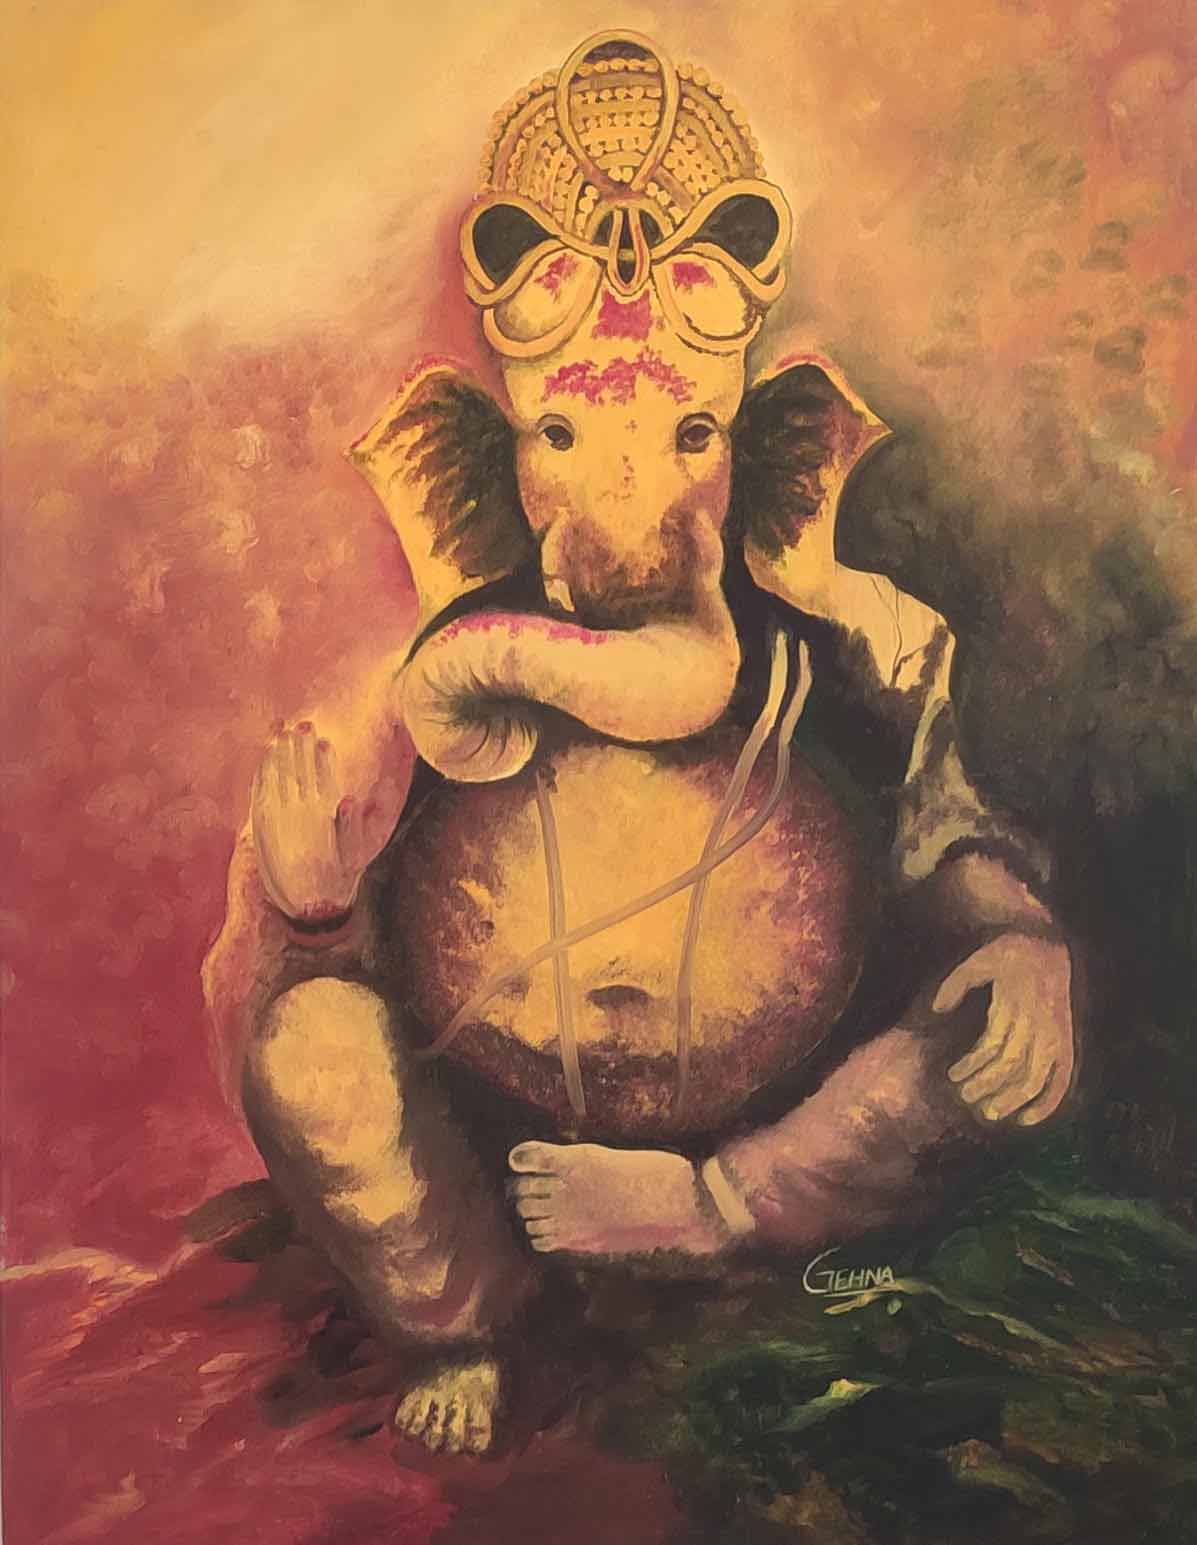 Realism Painting with Oil on Canvas "Ganesha-1" art by Gehna Goyal